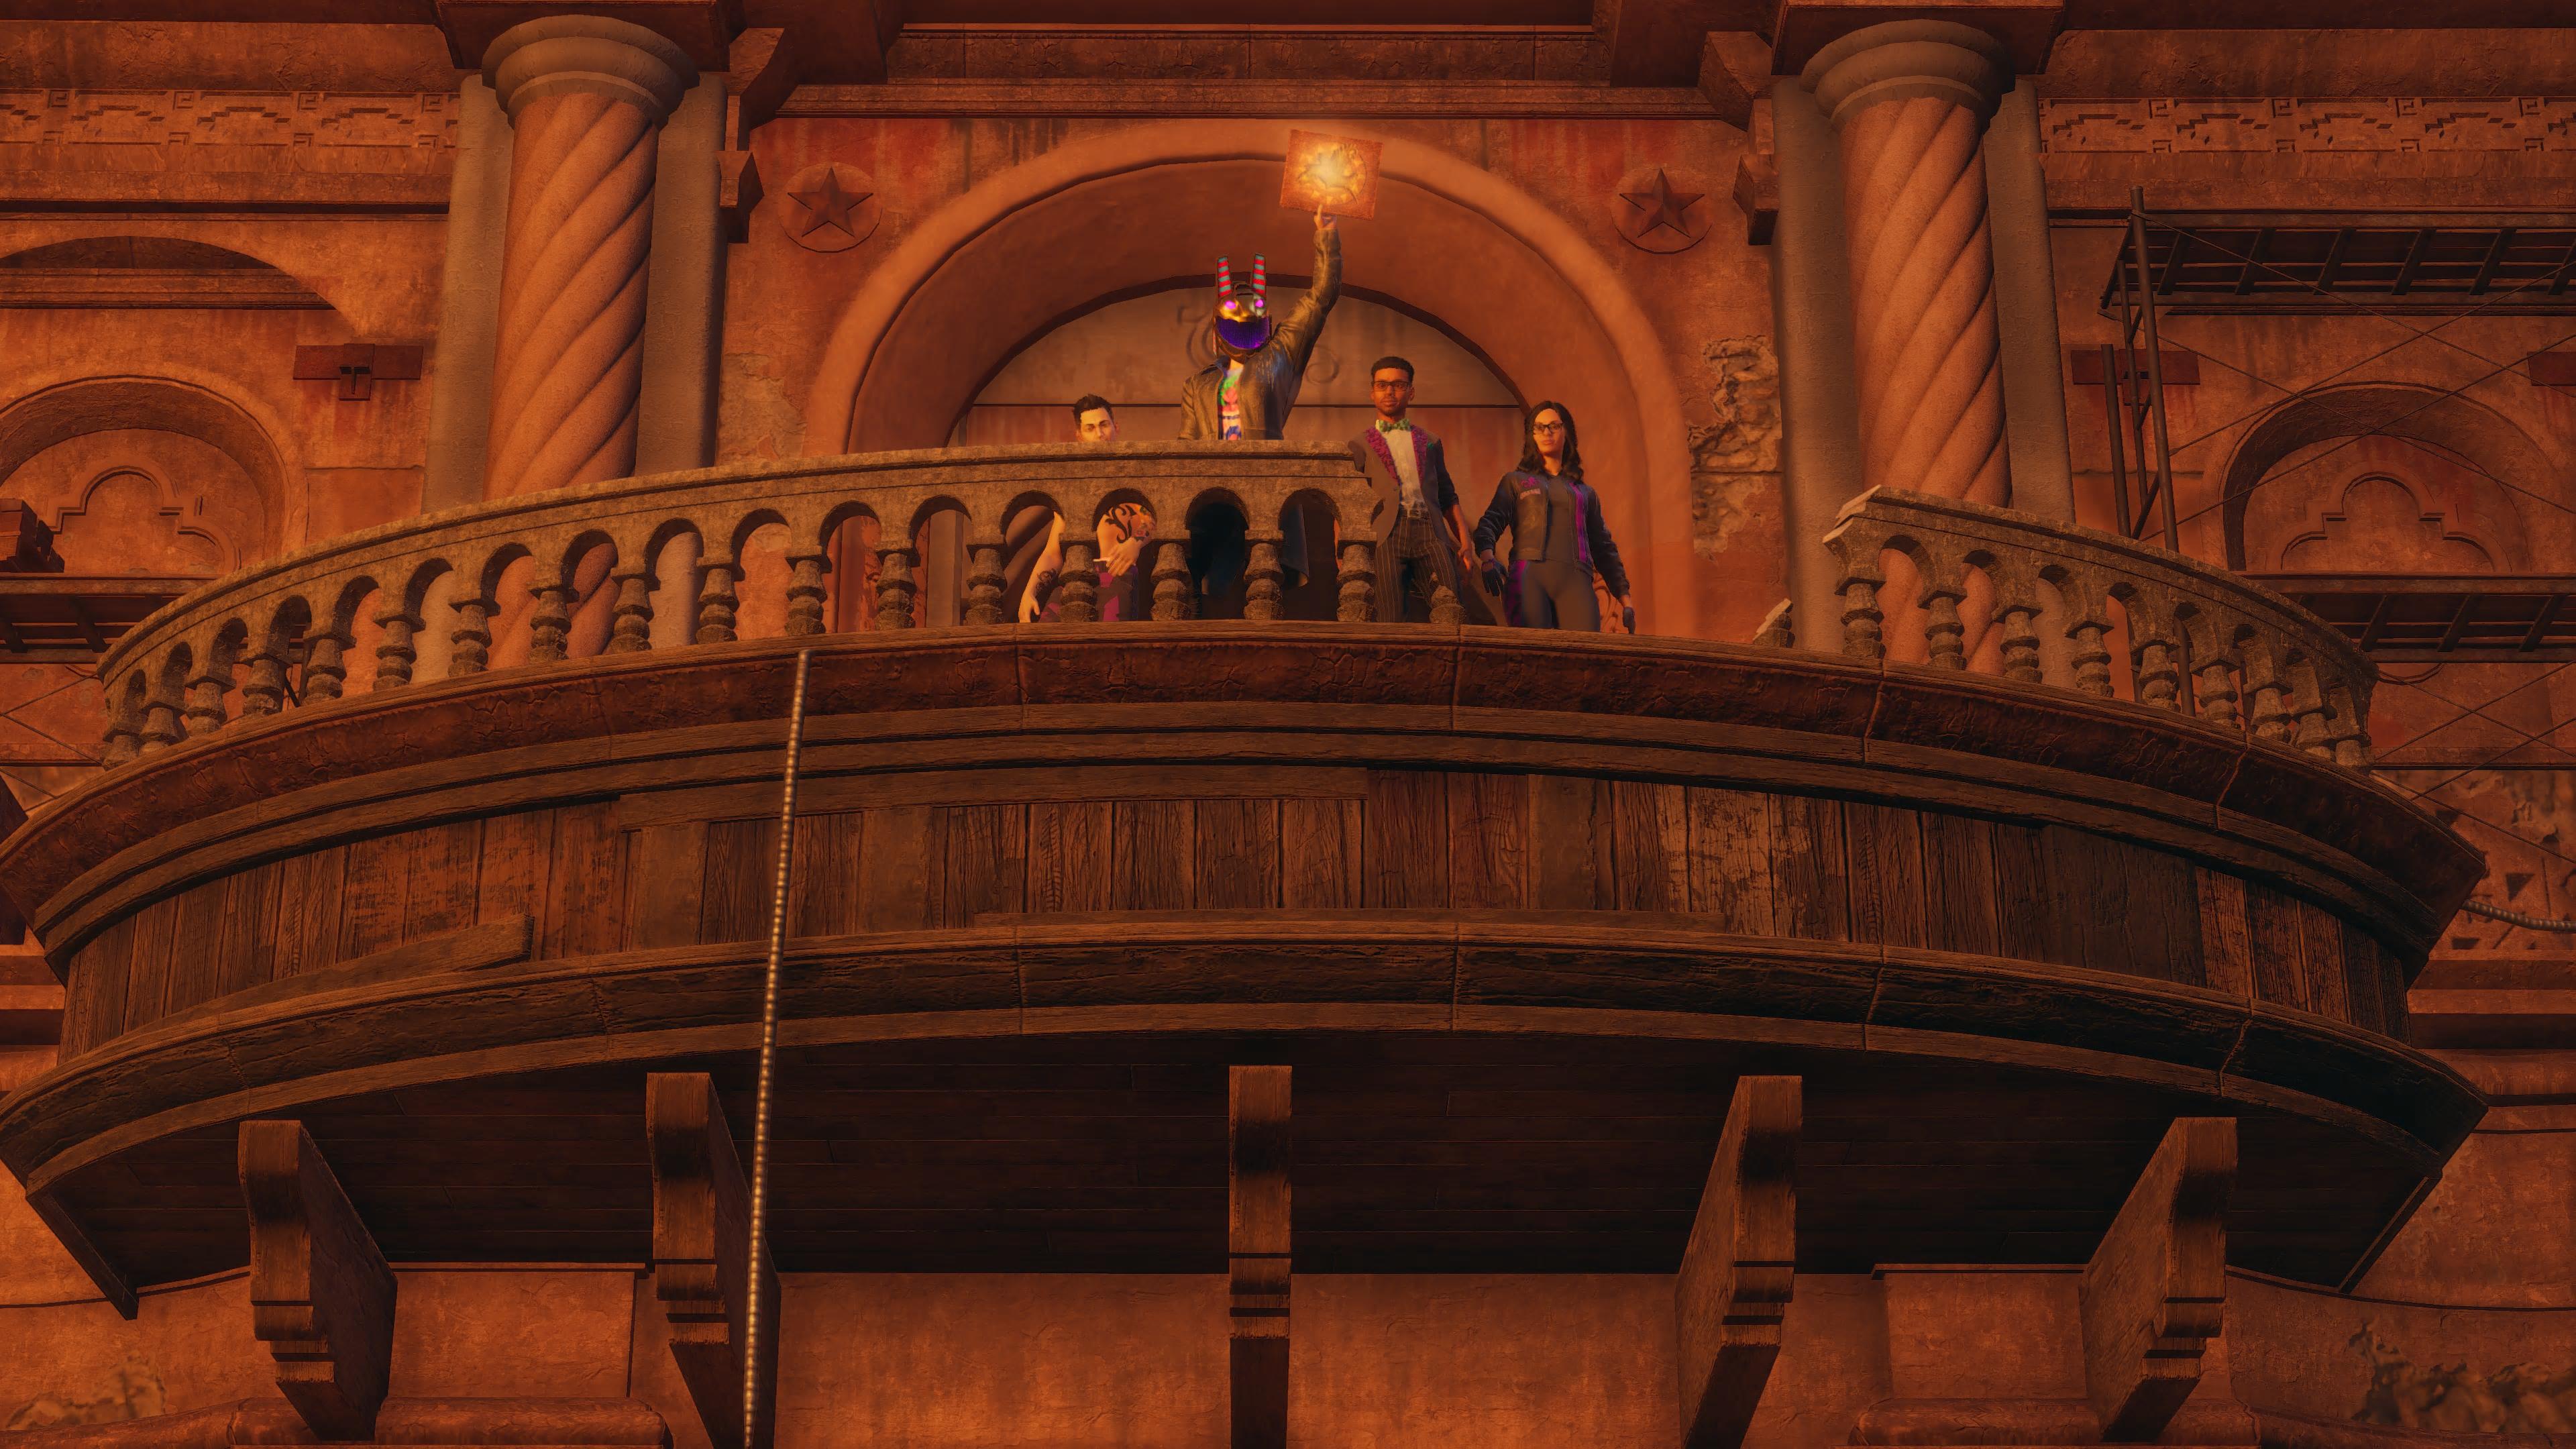 Saints Row review - a scene still of a character on a balcony